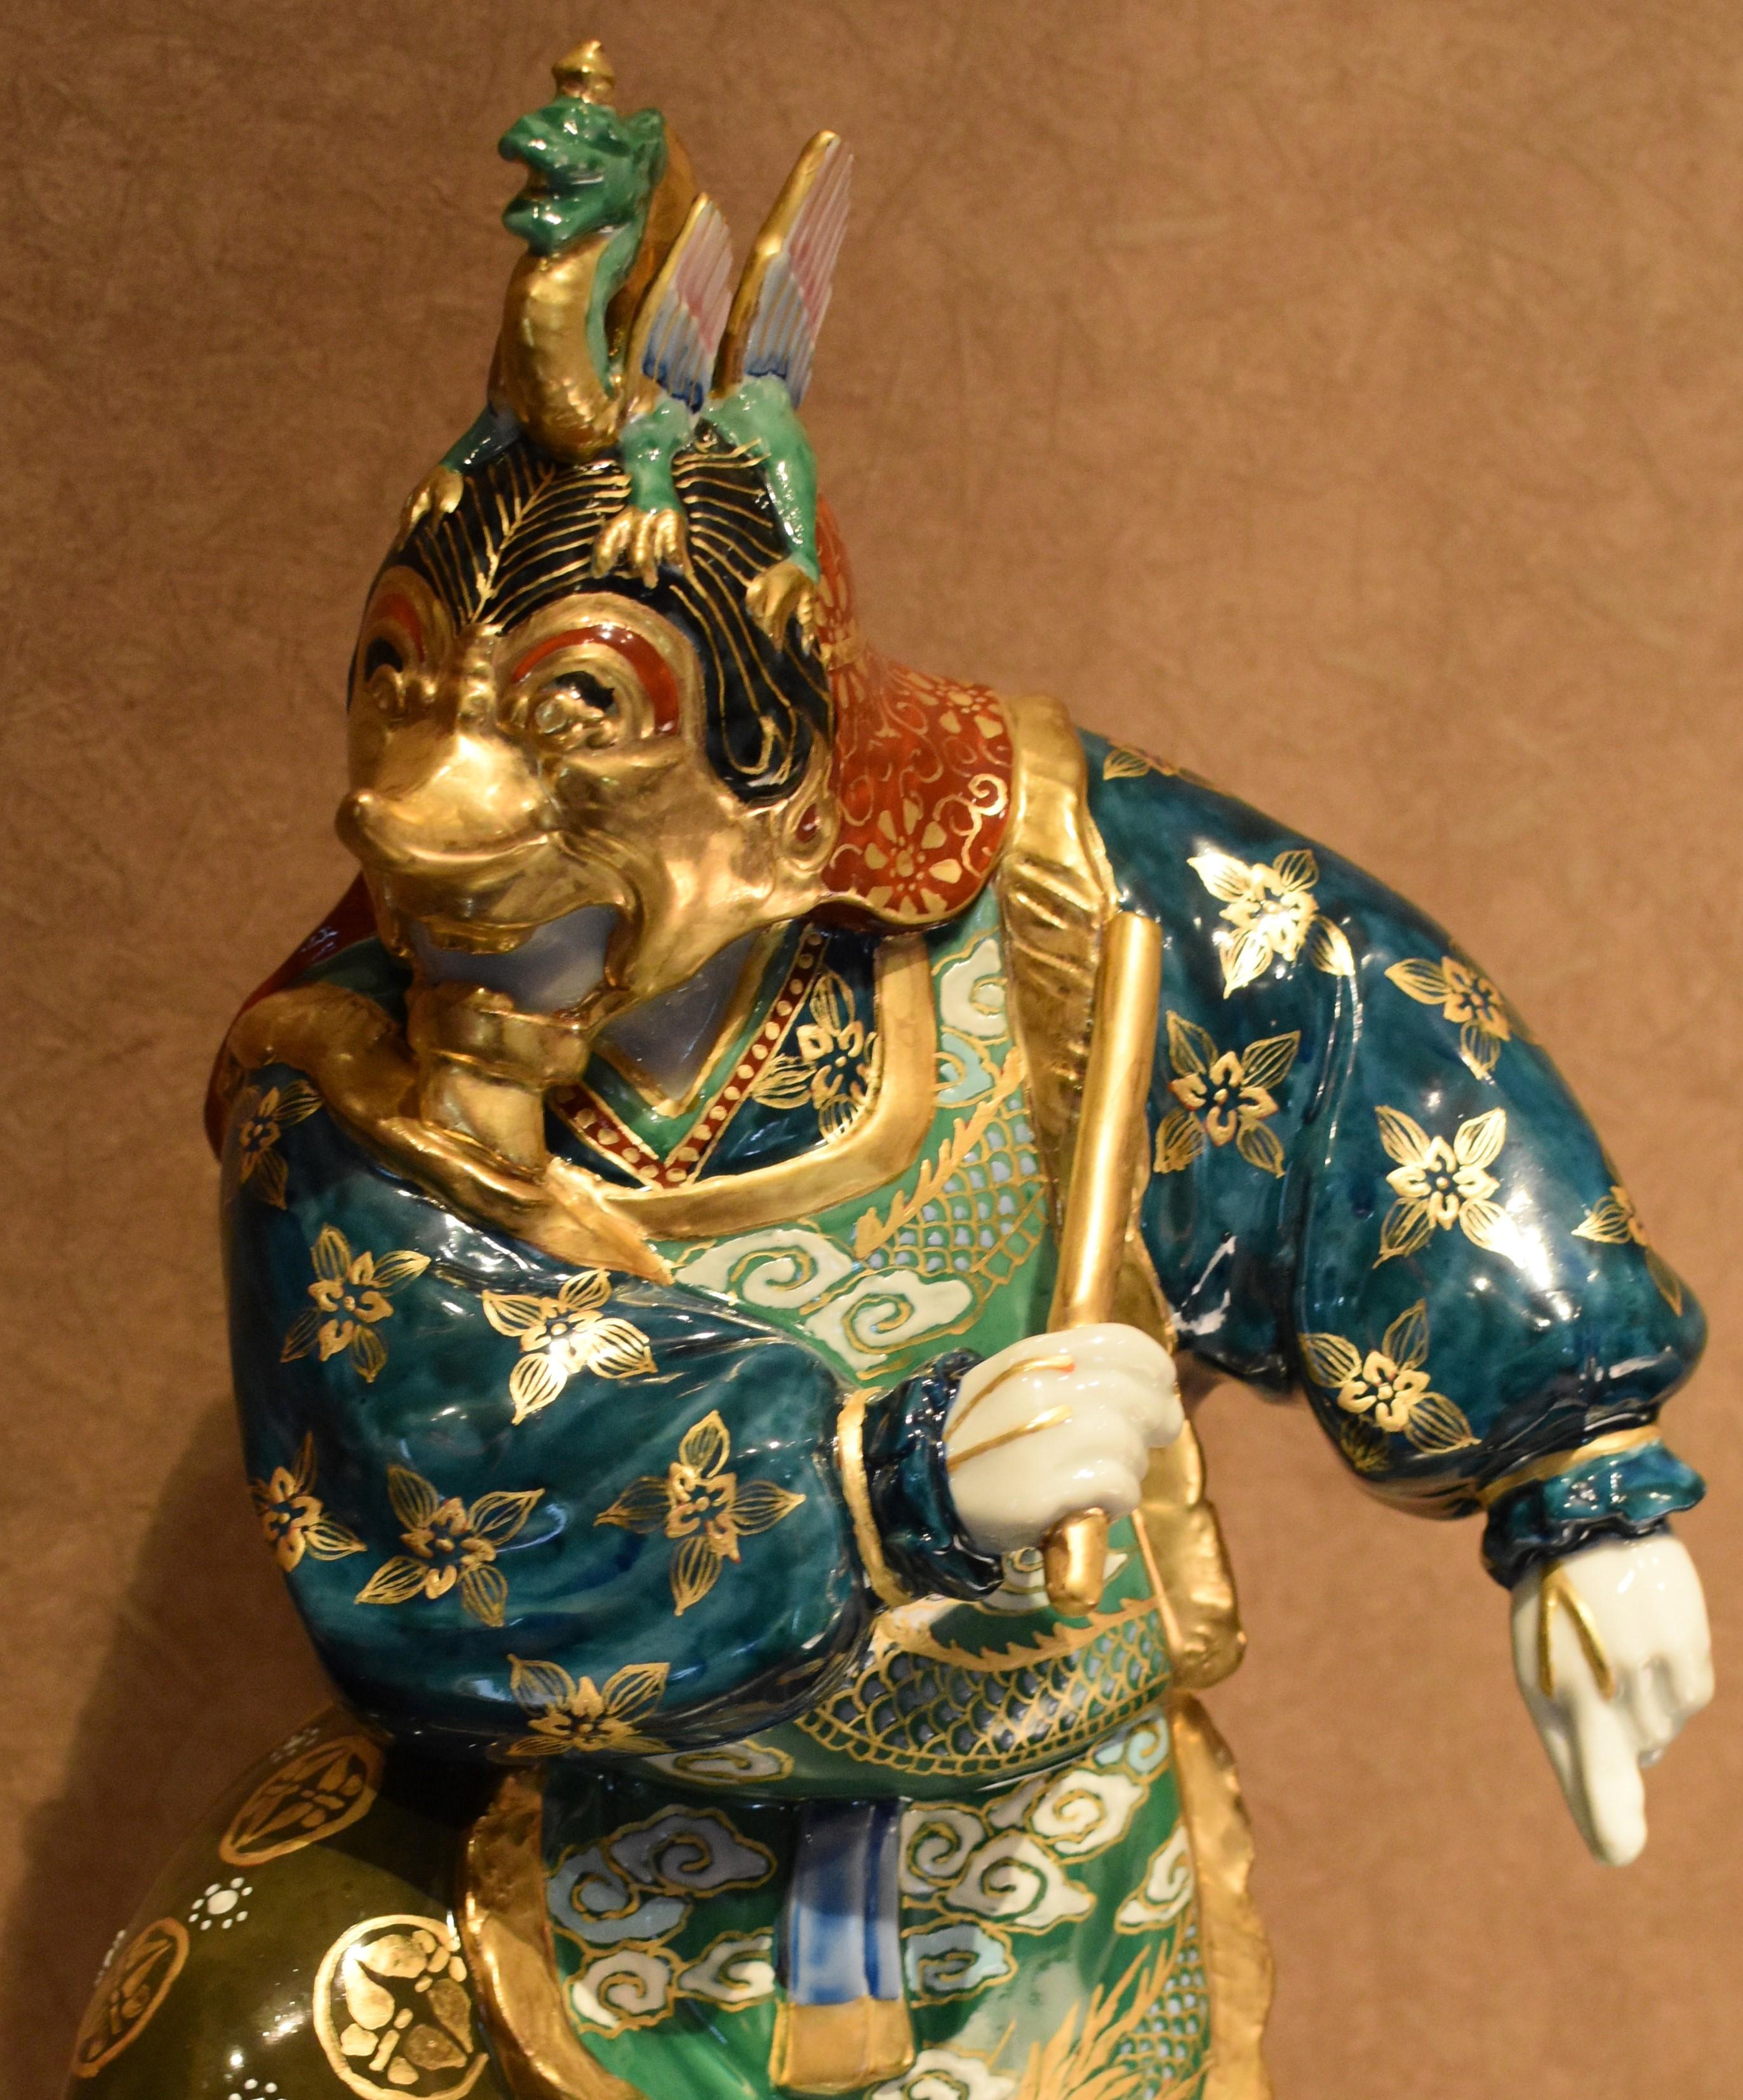 Hand-Crafted Porcelain Figurine Gold Green by Contemporary Japanese Master Artist For Sale